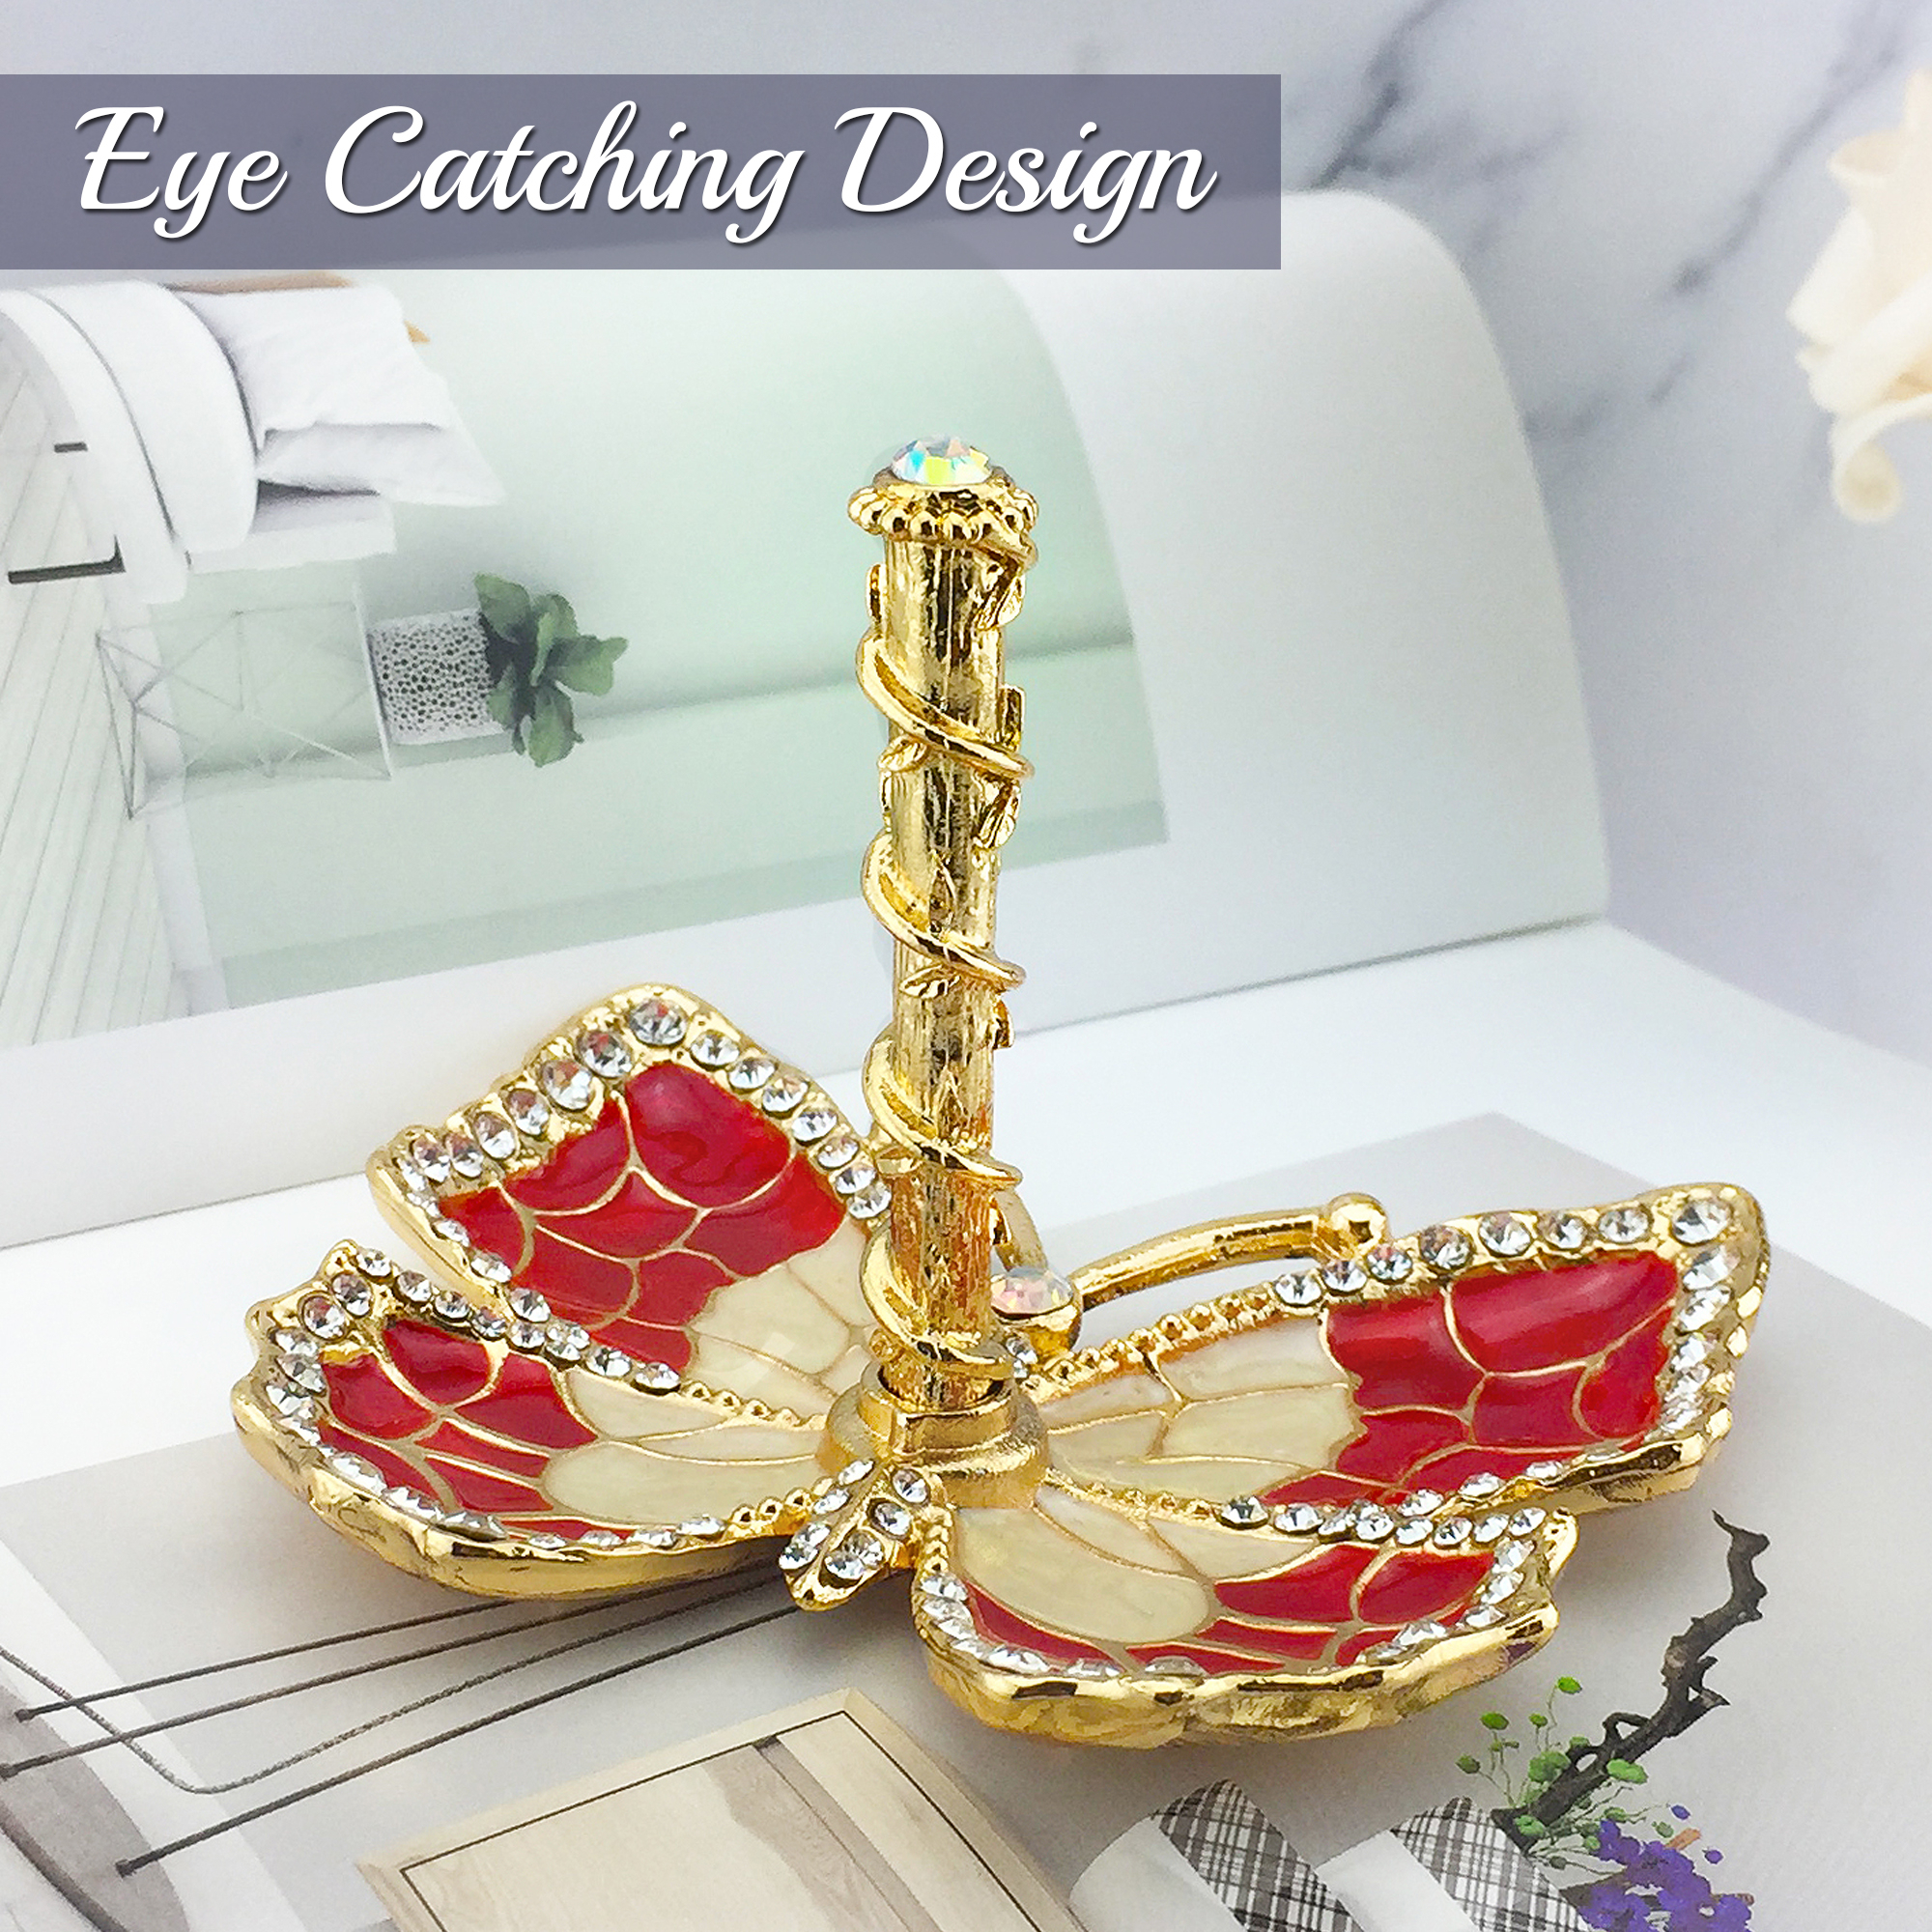 Matashi Red Enamel And Gold Plated Butterfly Jewelry Ring Holder With Crystals New Year Birthday Christmas Gift For Mom Girlfriend Wife